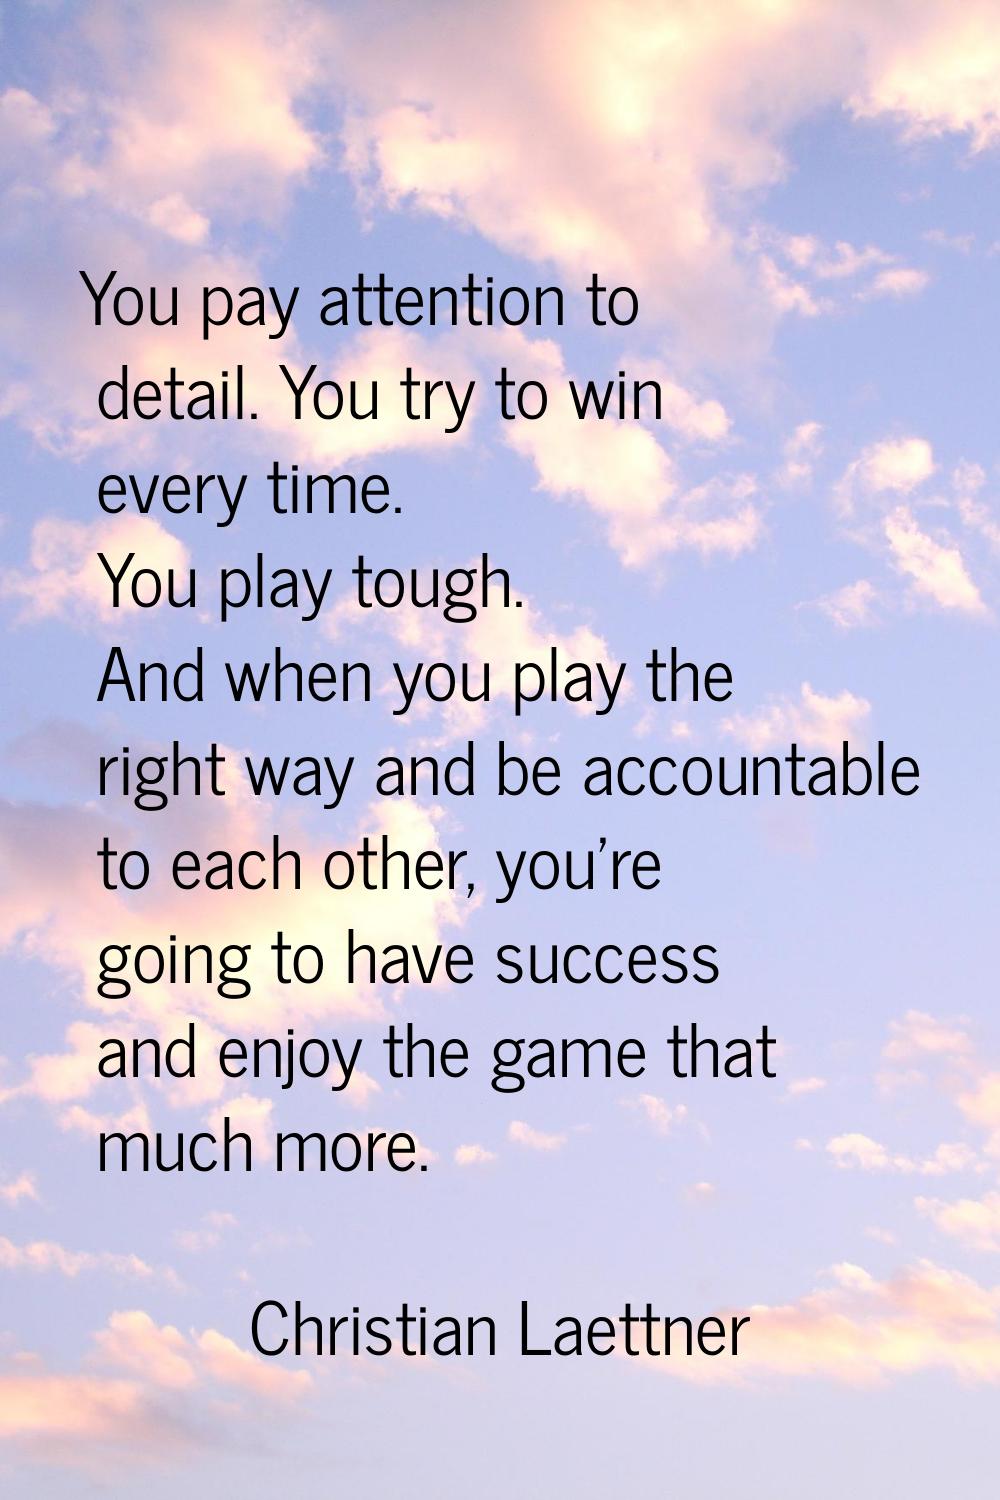 You pay attention to detail. You try to win every time. You play tough. And when you play the right